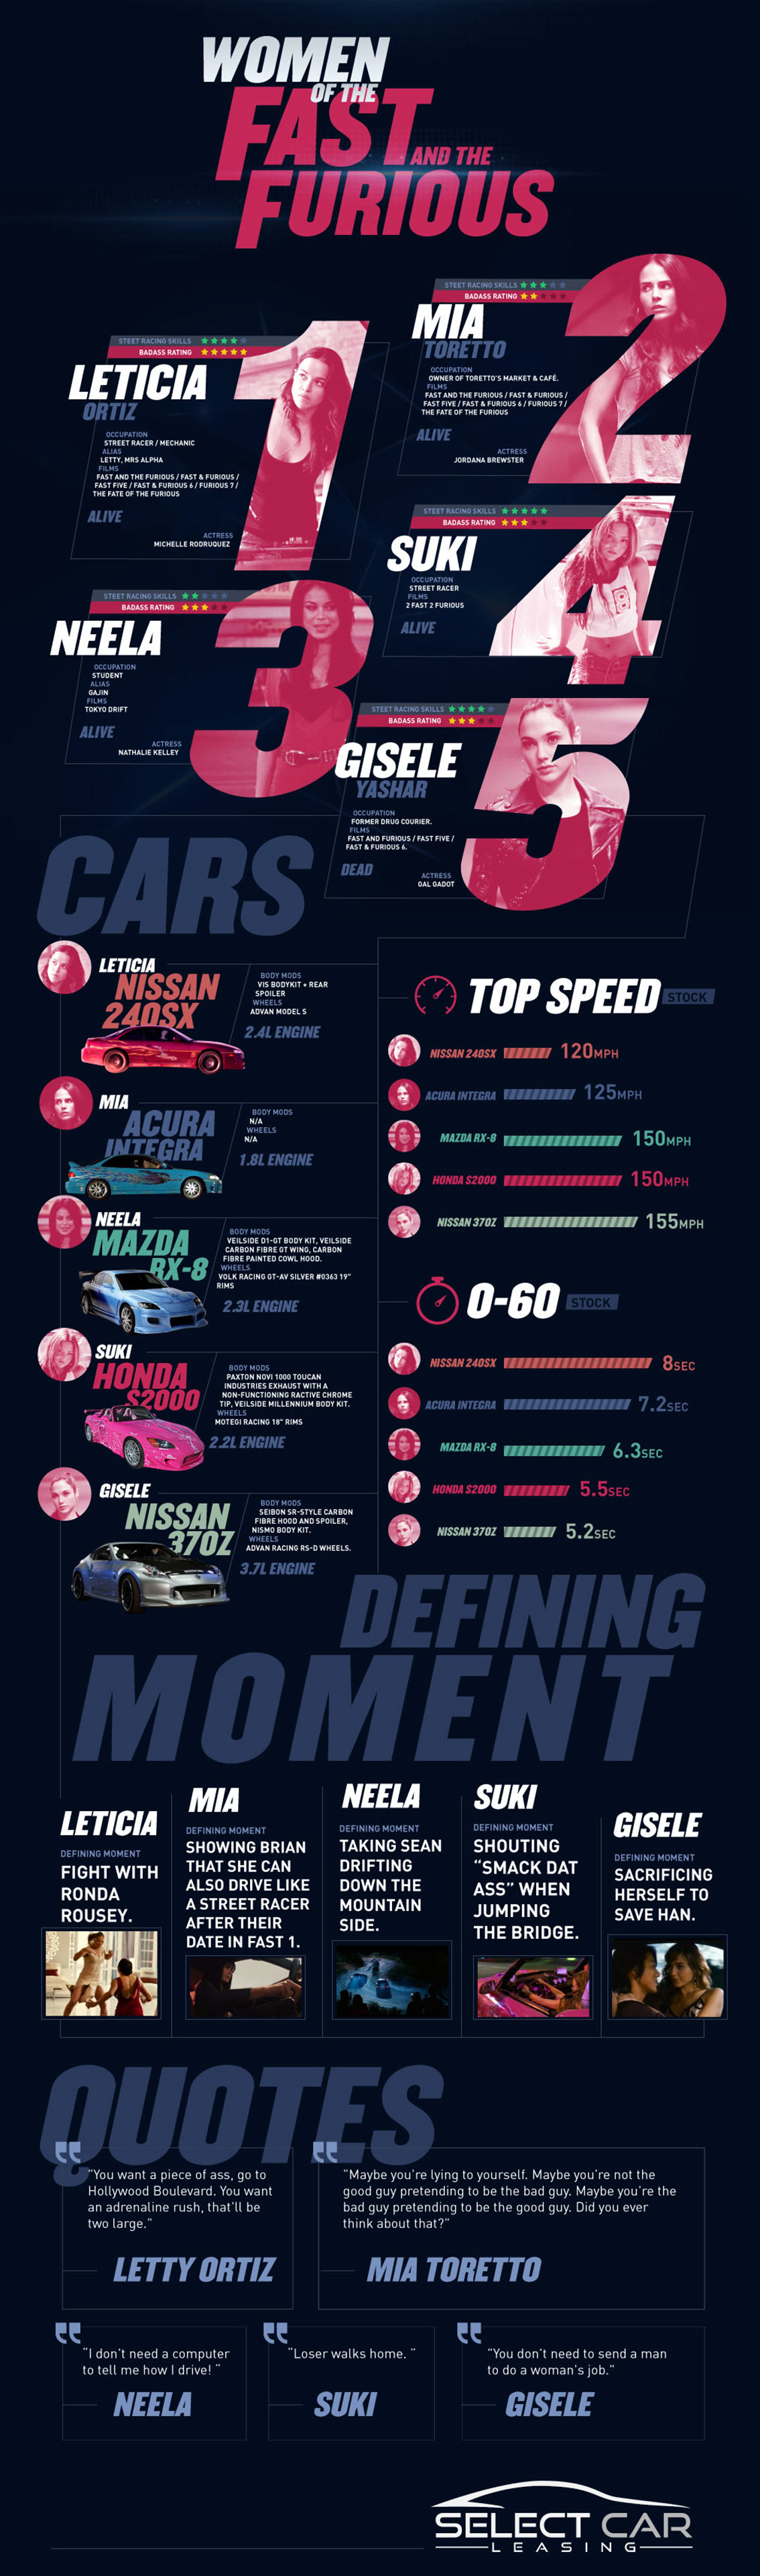 The Fast and the Furious: Female Casts [Infographic]